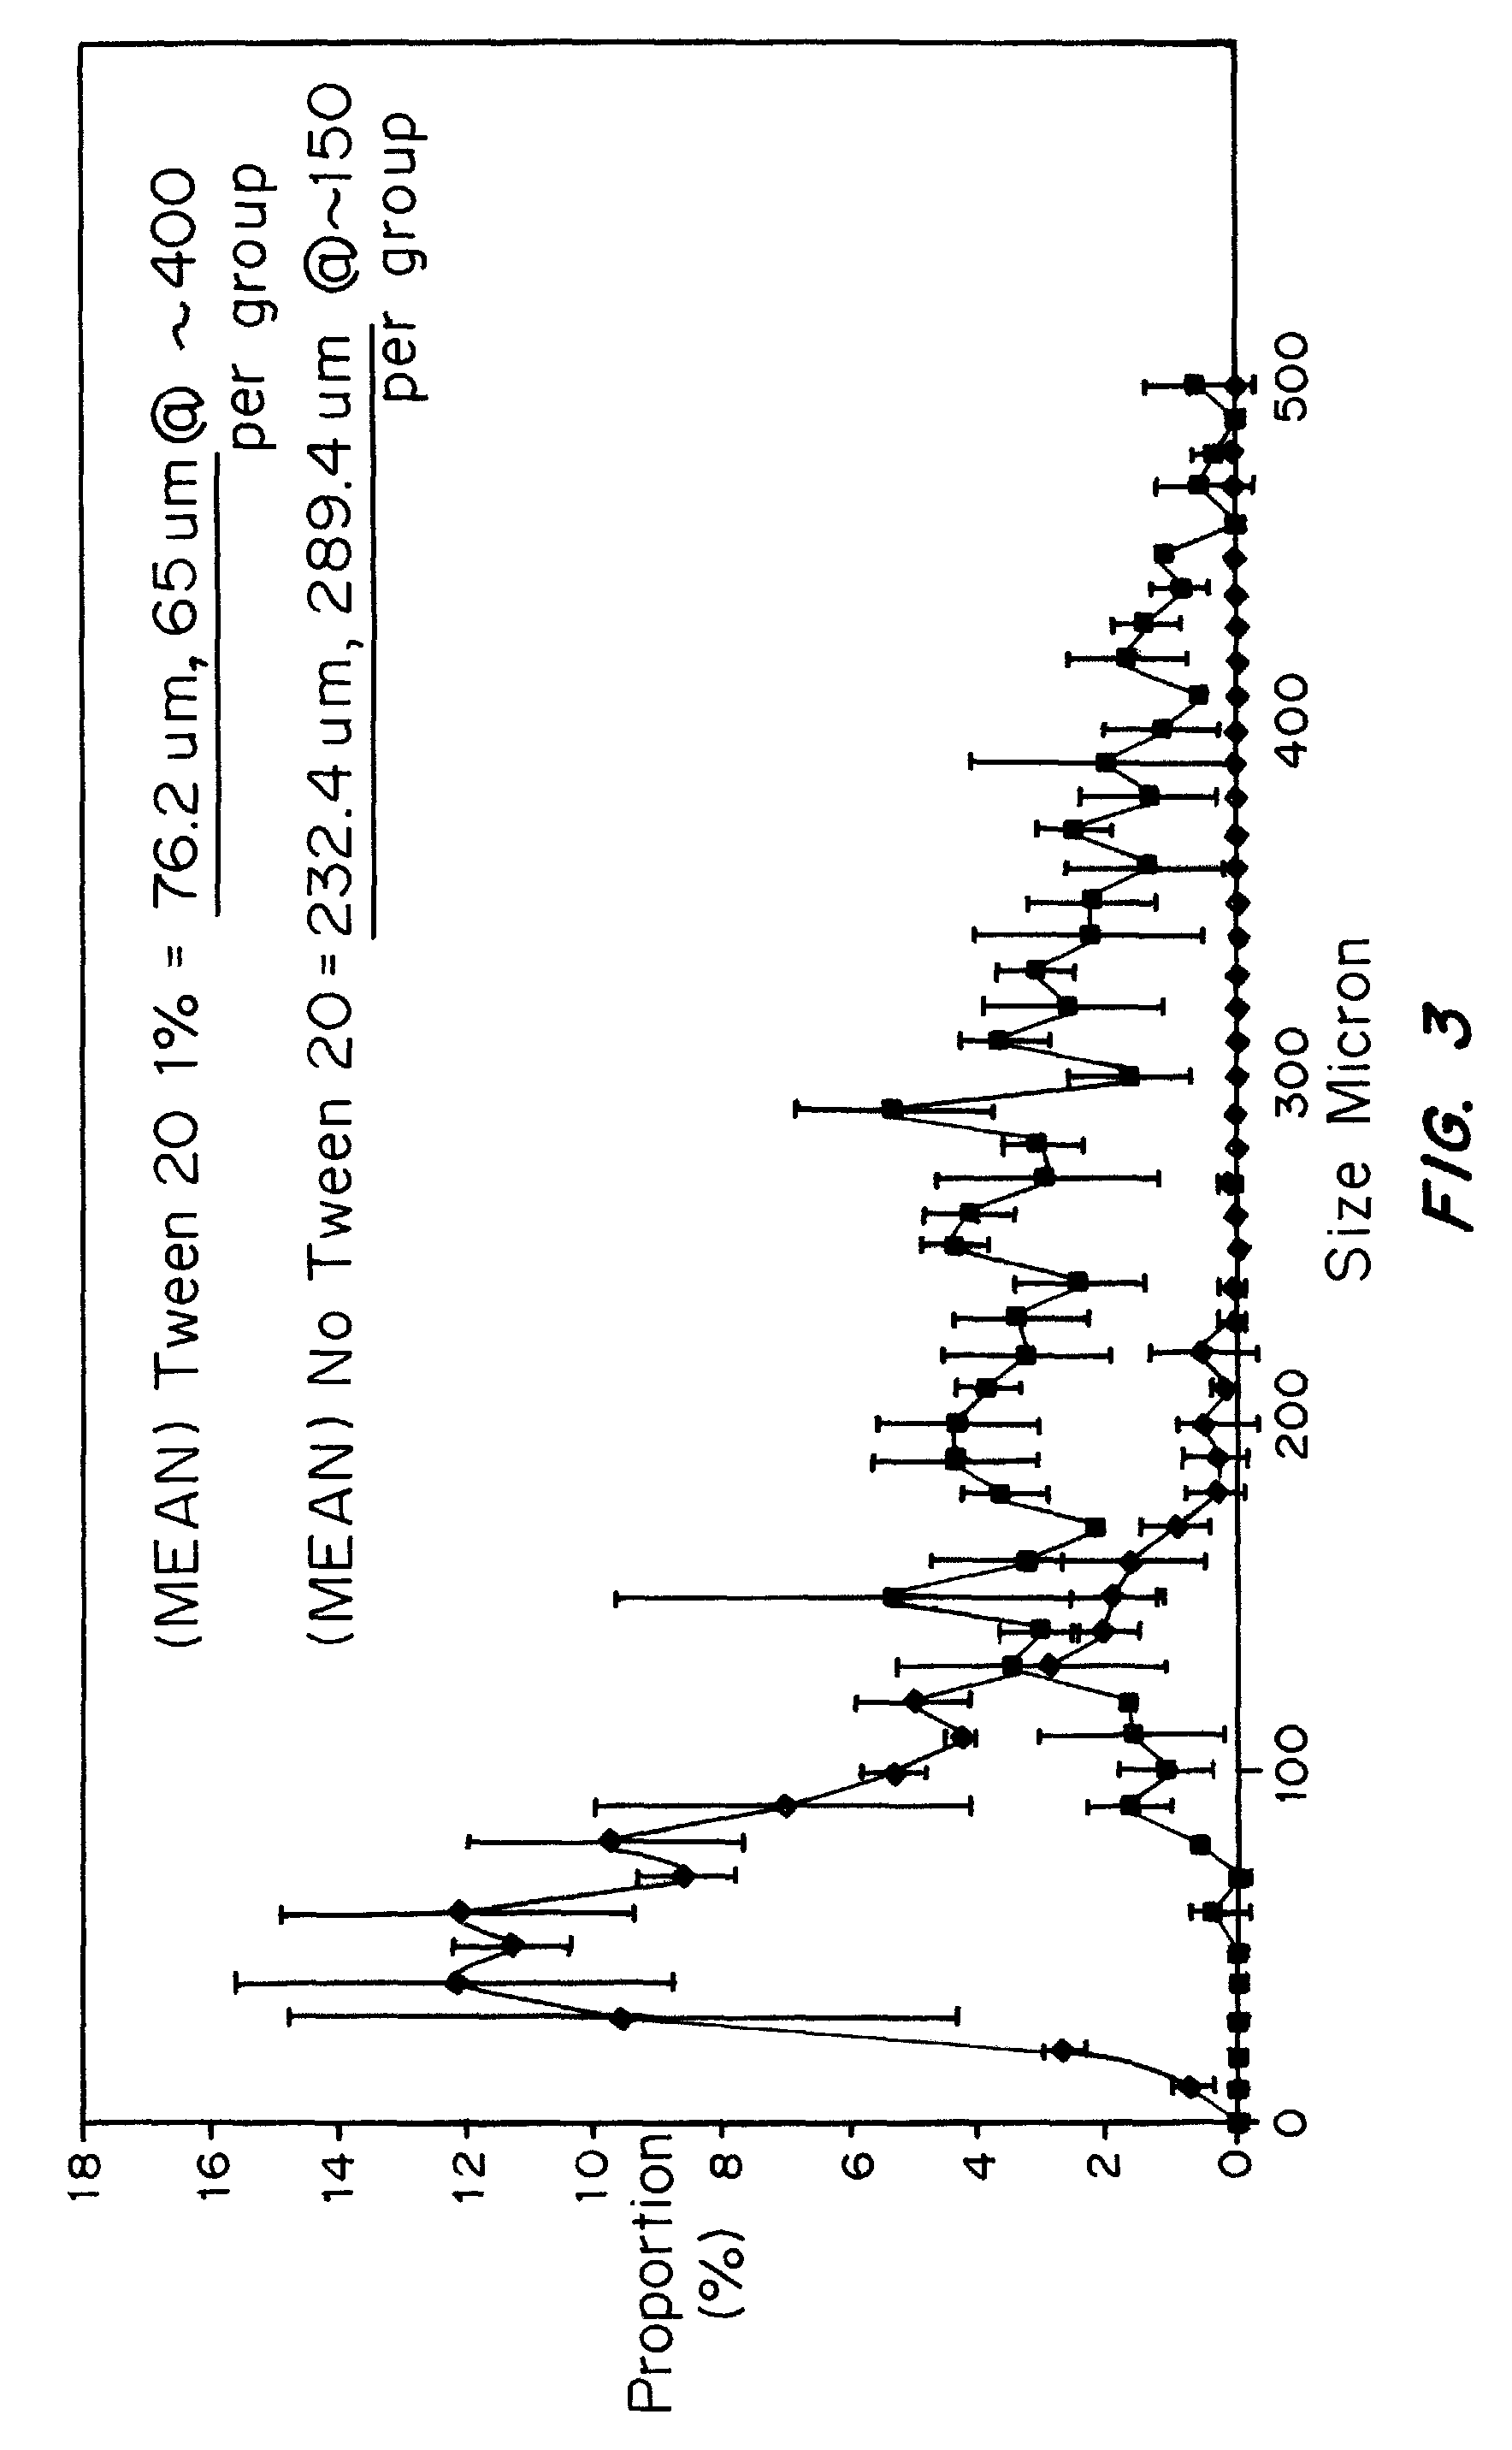 Collagen-based microspheres and methods of preparation and uses thereof